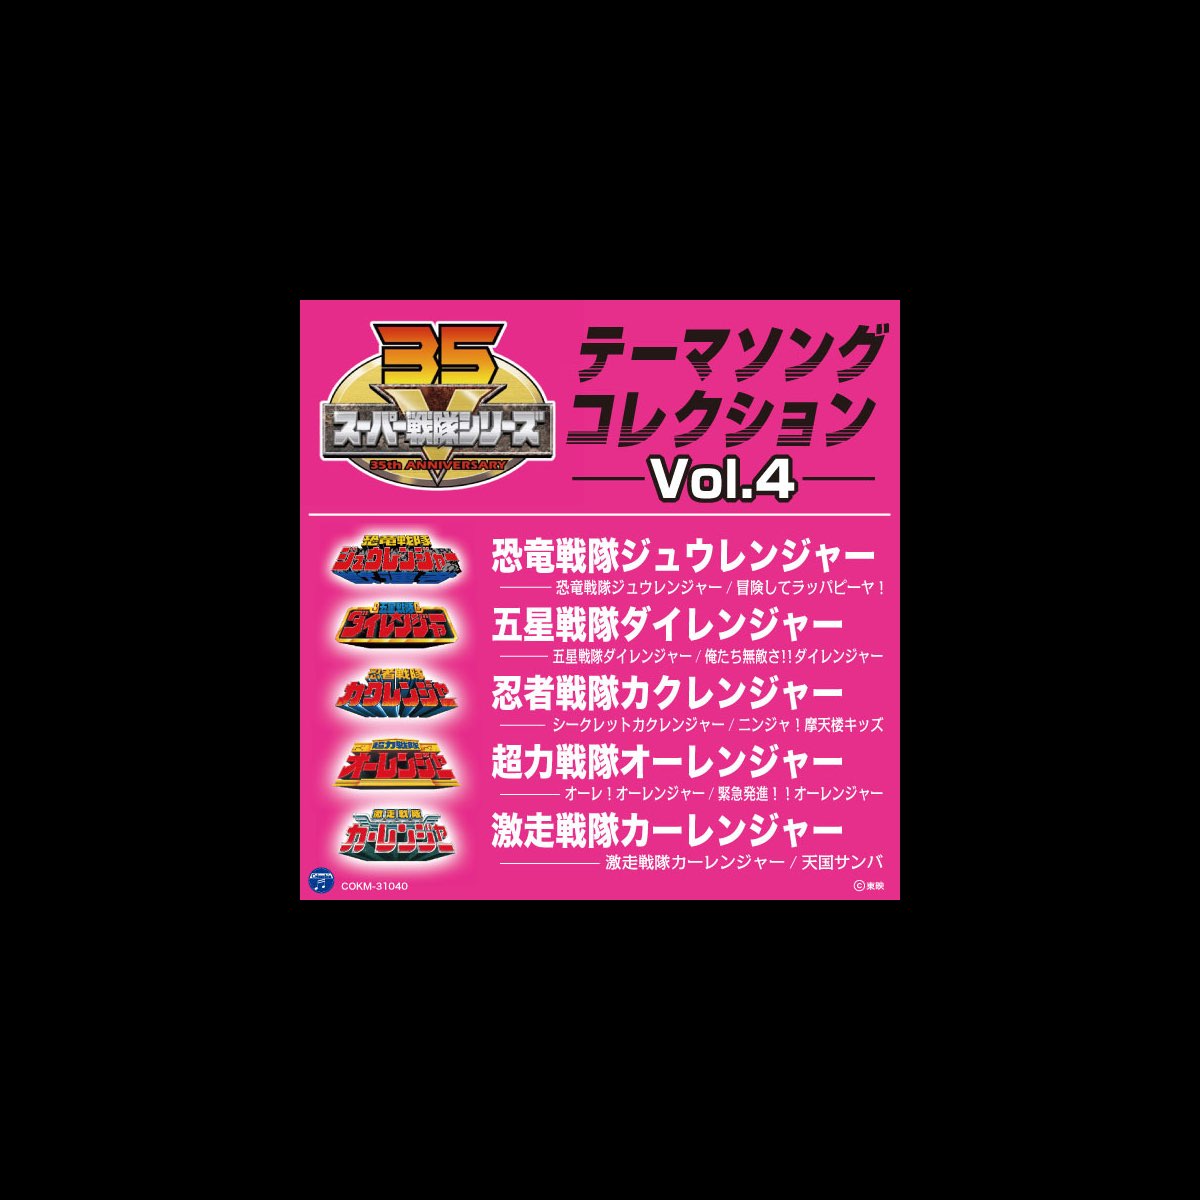 Super Sentai Series Theme Songs Collection Vol 4 By Various Artists On Apple Music